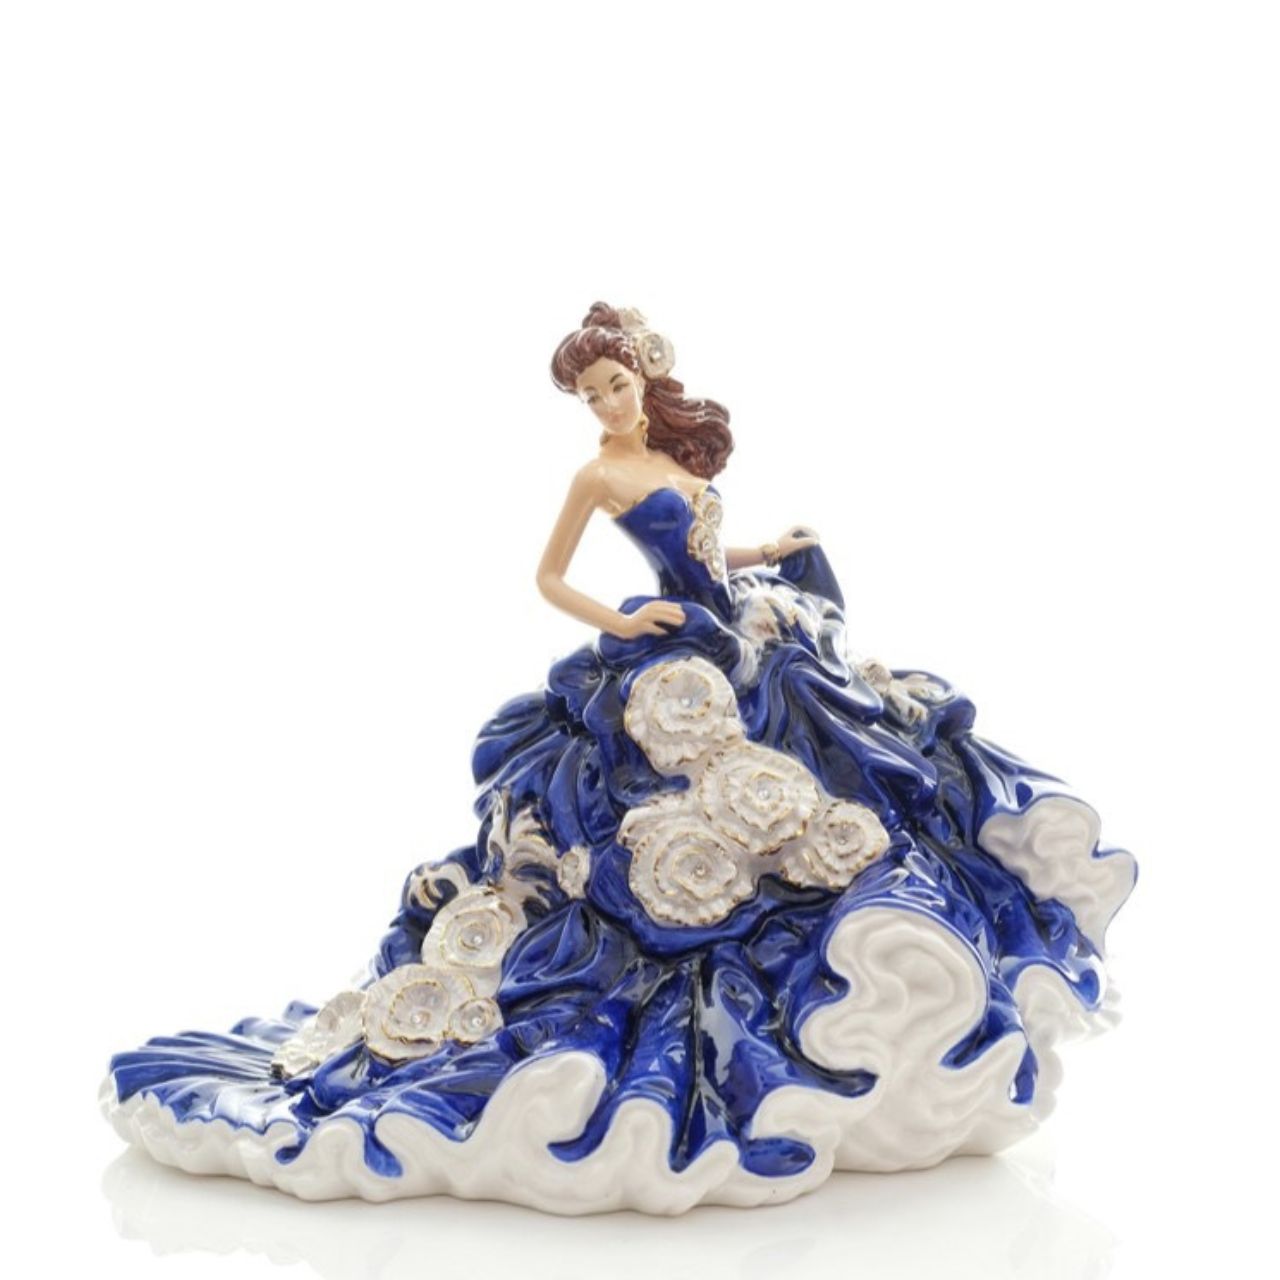 English Ladies Moonlight Enchantment  Our fabulous Moonlight Enchantment figurine is the latest figure in the English Ladies Co range.  Designed and modelled by Valerie Annand, our master painter Dan Smith has created this wonderful colourway.